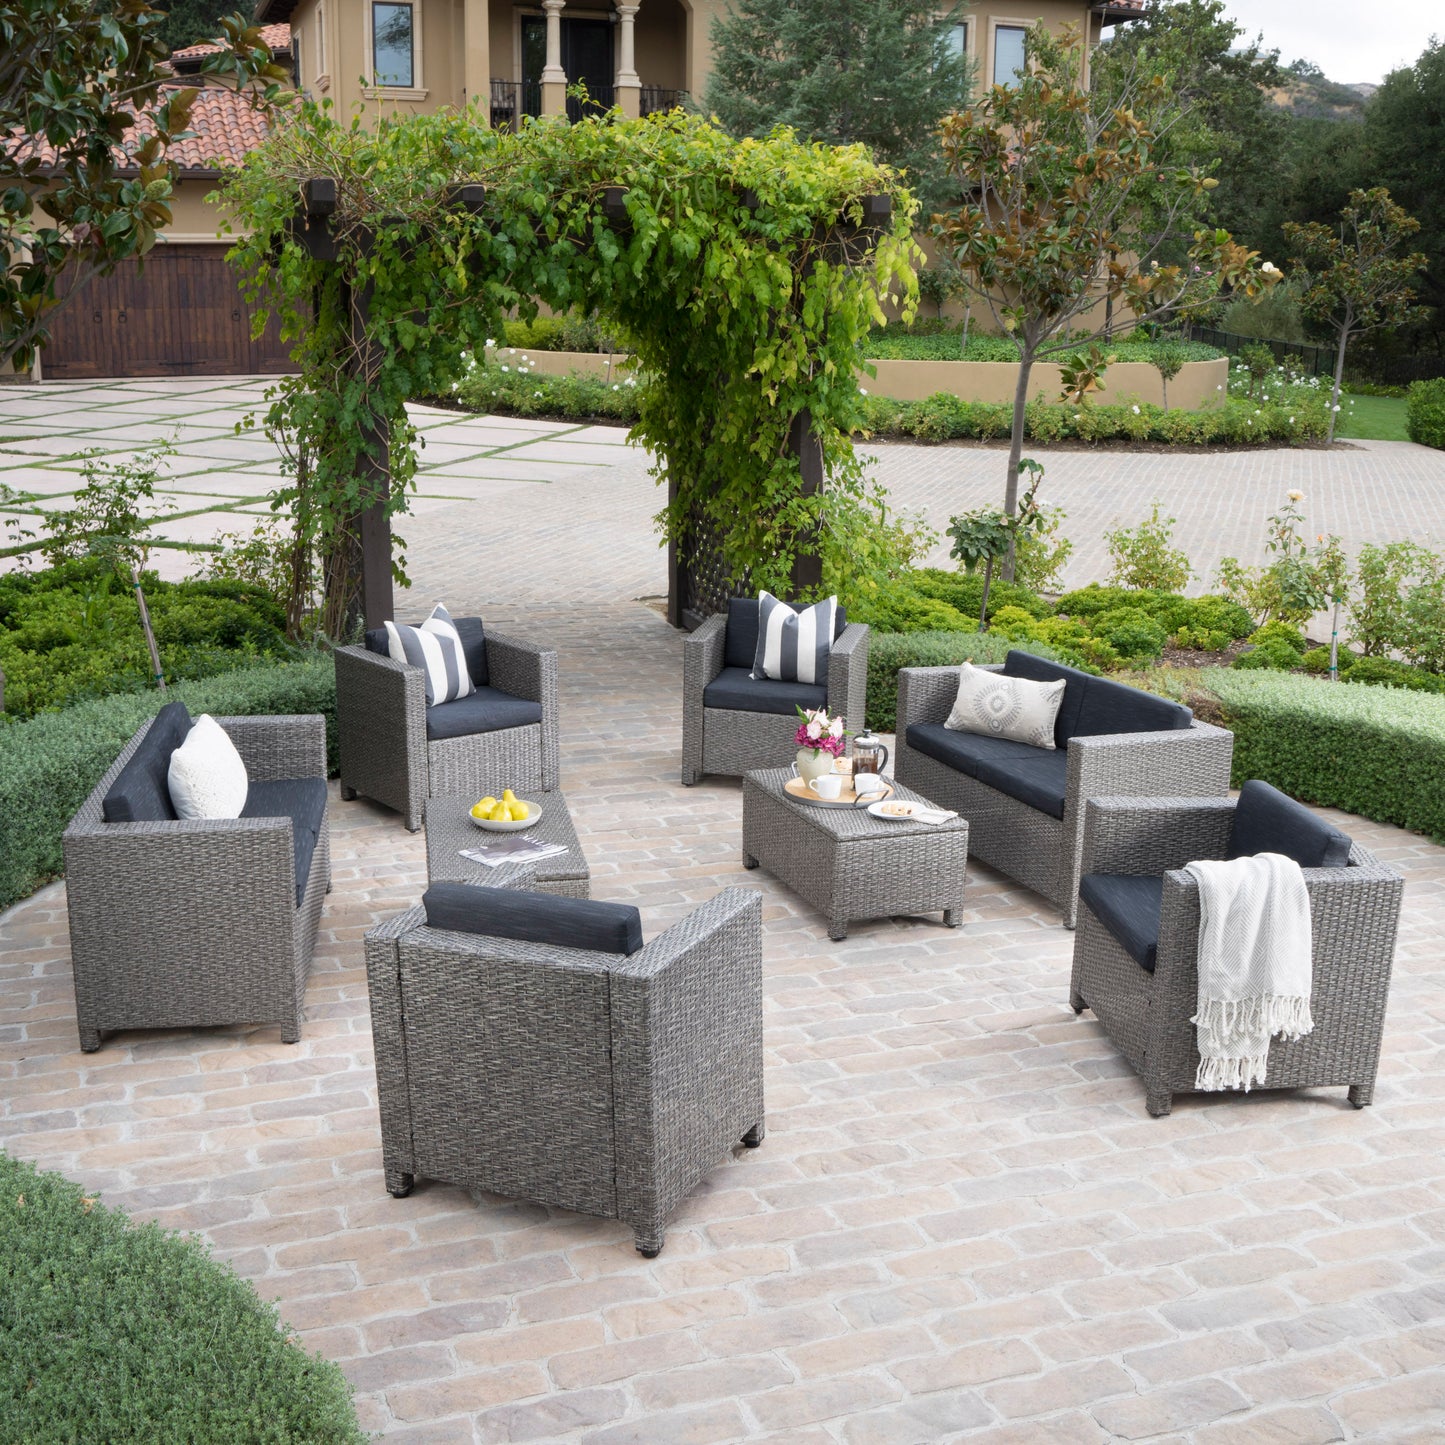 Feronia Outdoor 8 Pc Wicker Chat Set w/ Water Resistant Cushions